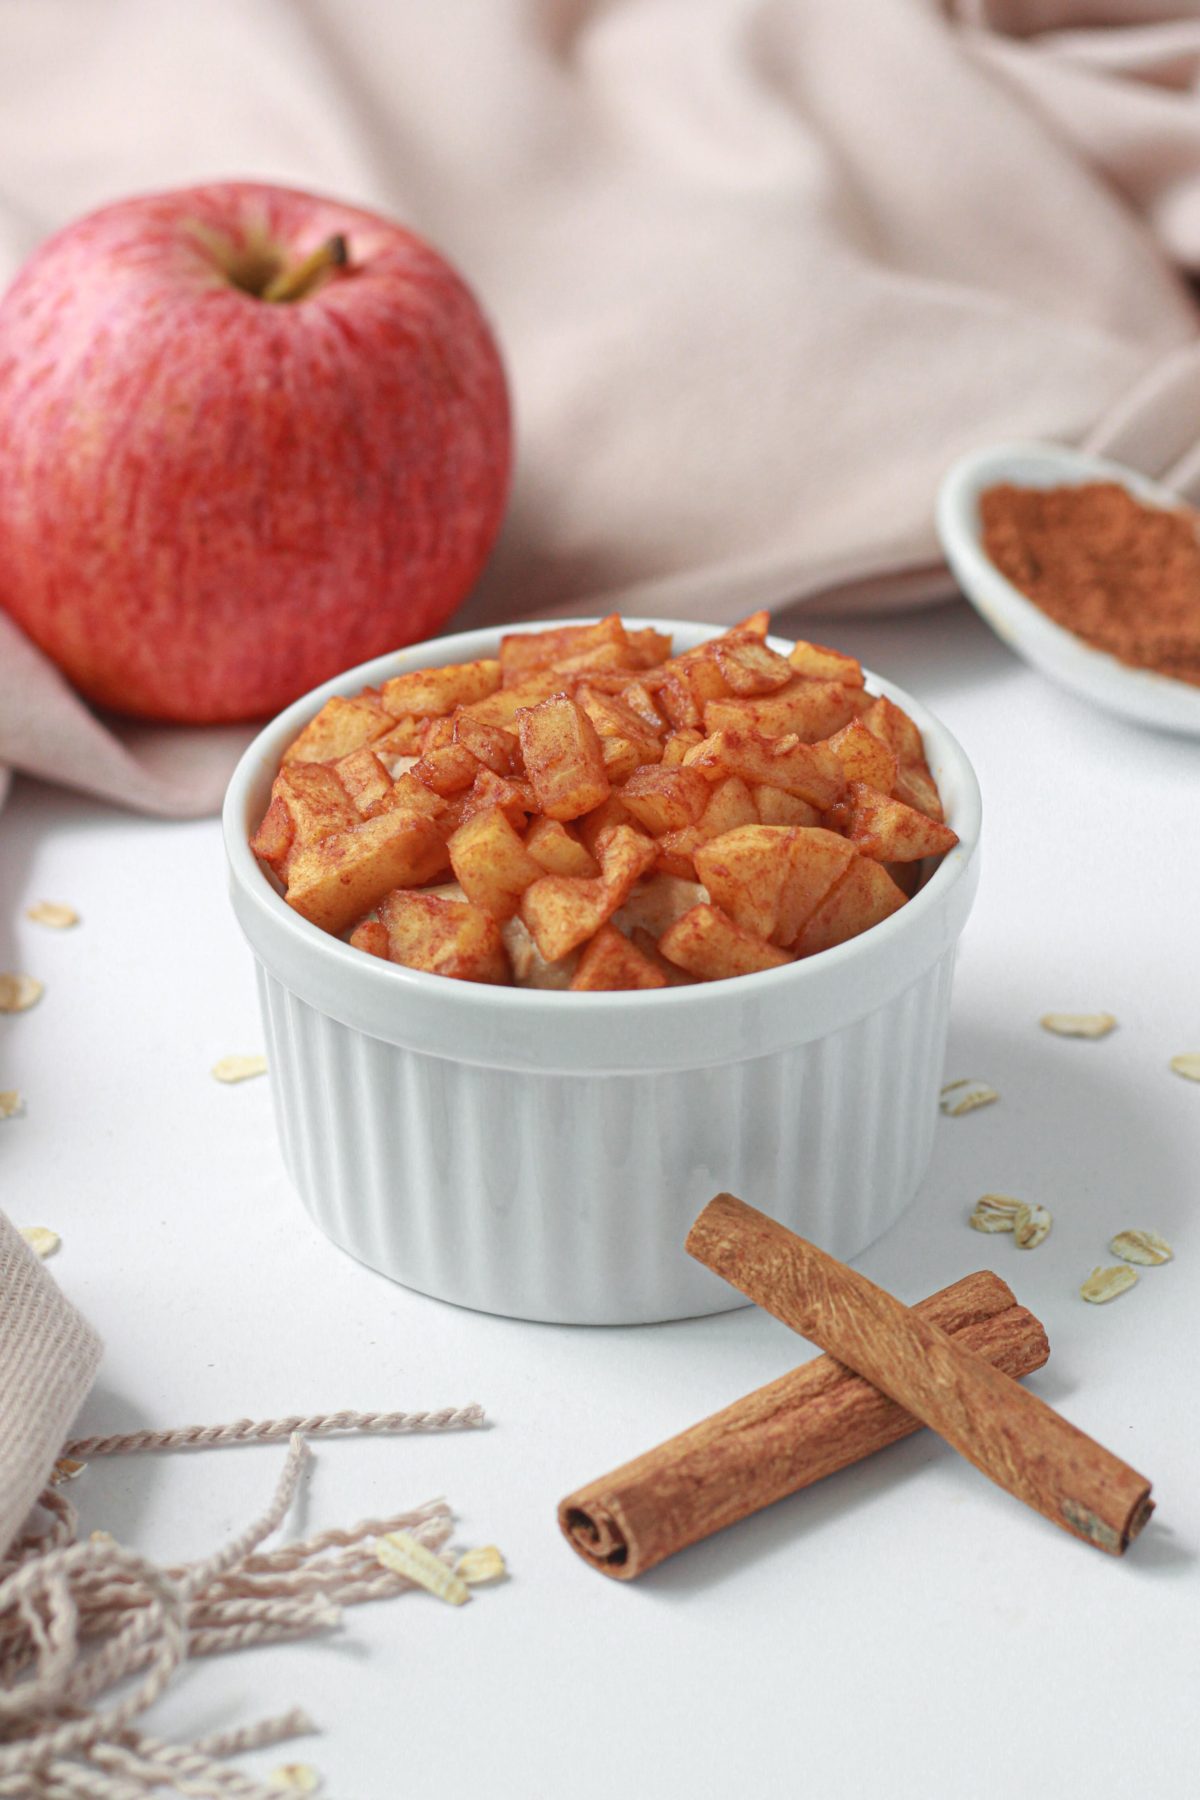 how to make cream cheese apple baked oats